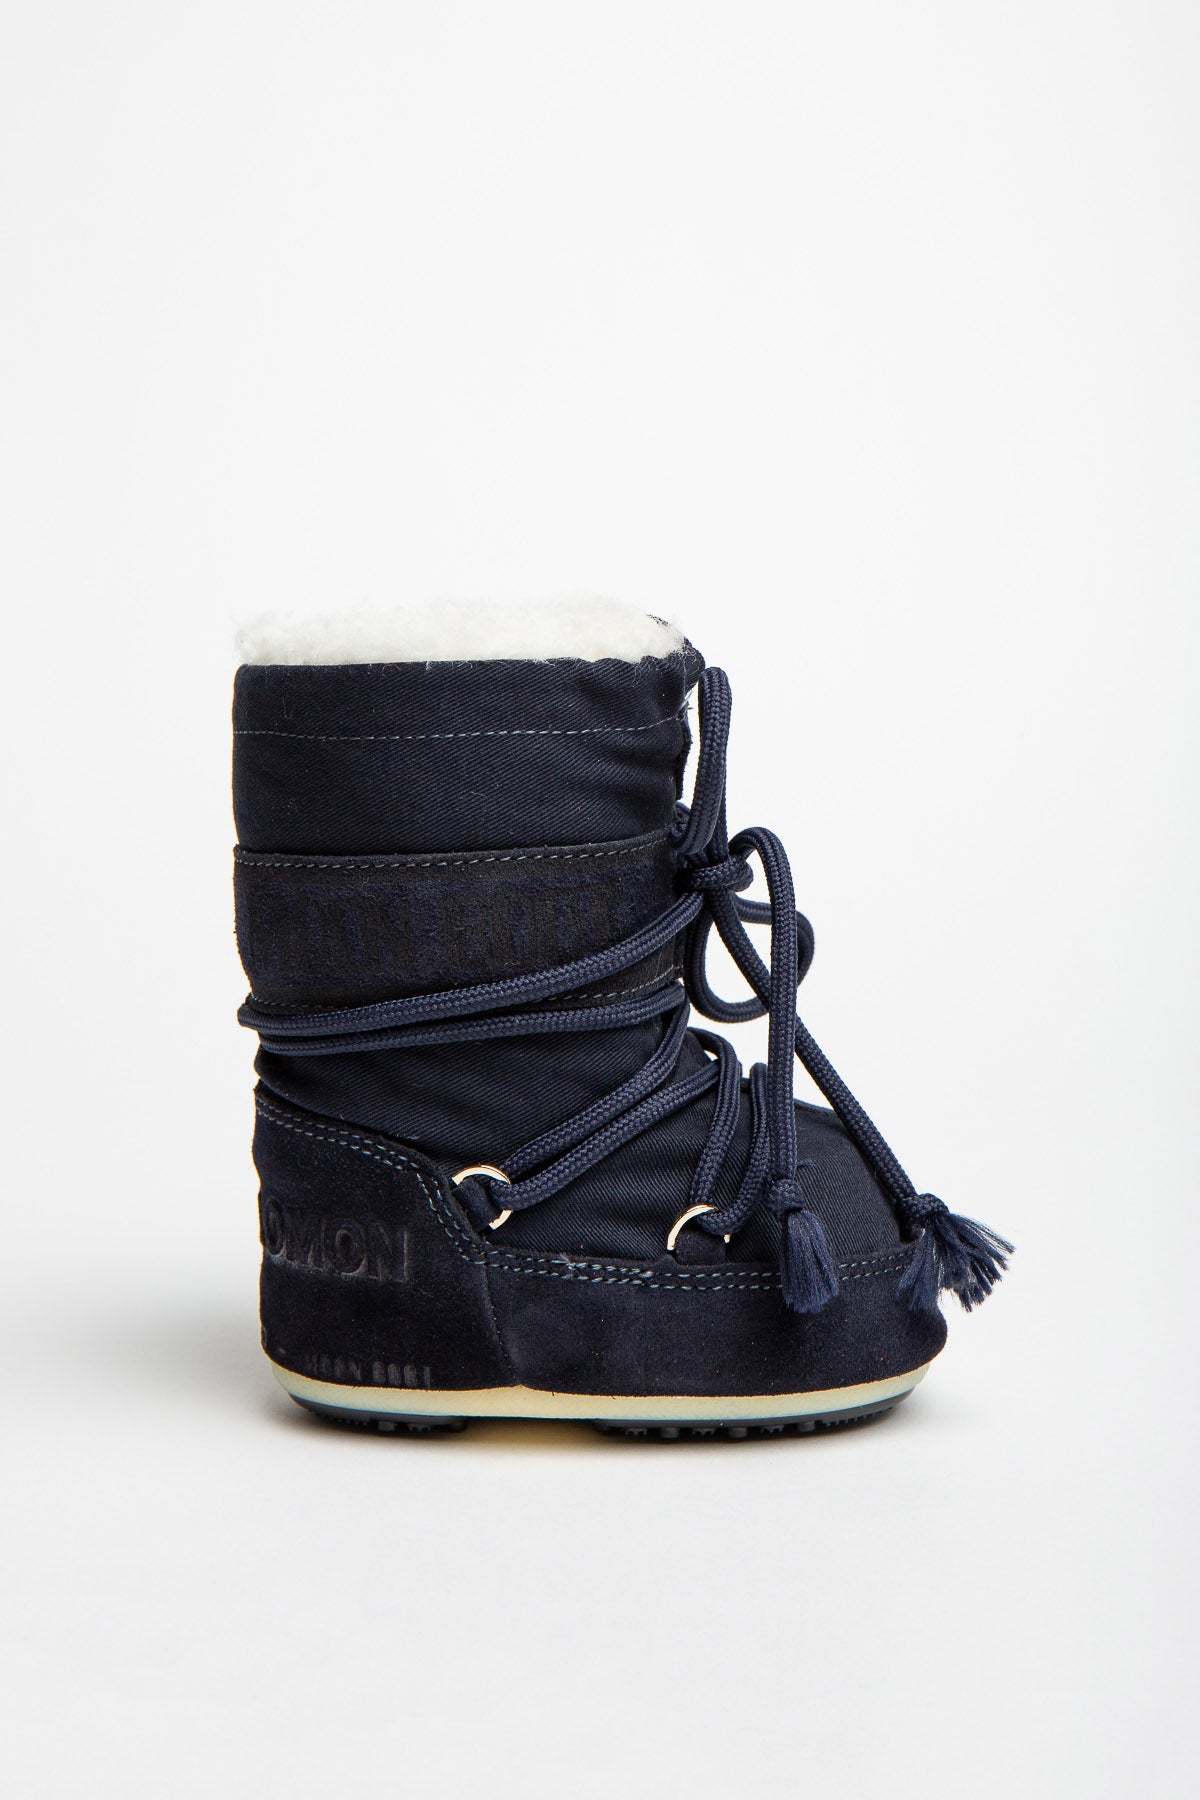 MAXFIELD PRIVATE COLLECTION | KIDS MOON BOOTS